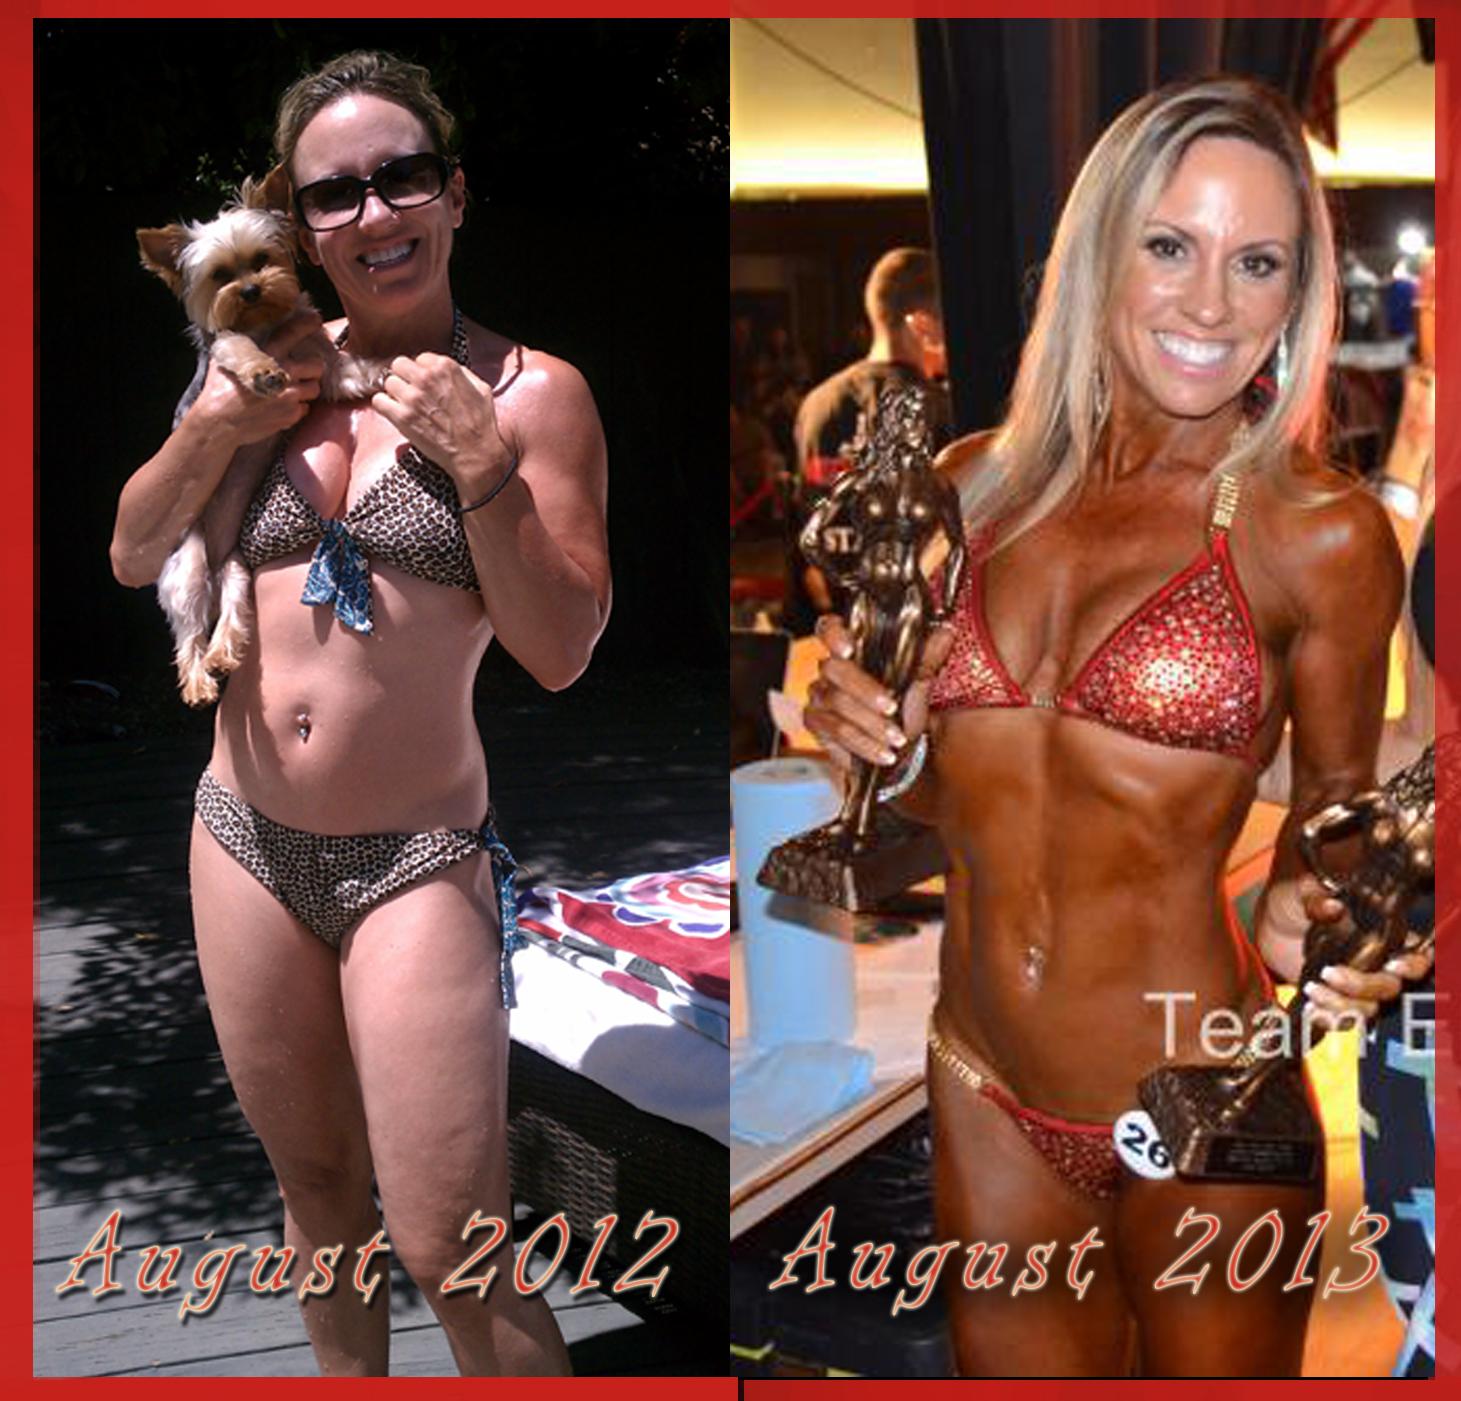 50 Year Old Takes 1st Place in First Bikini Competition!